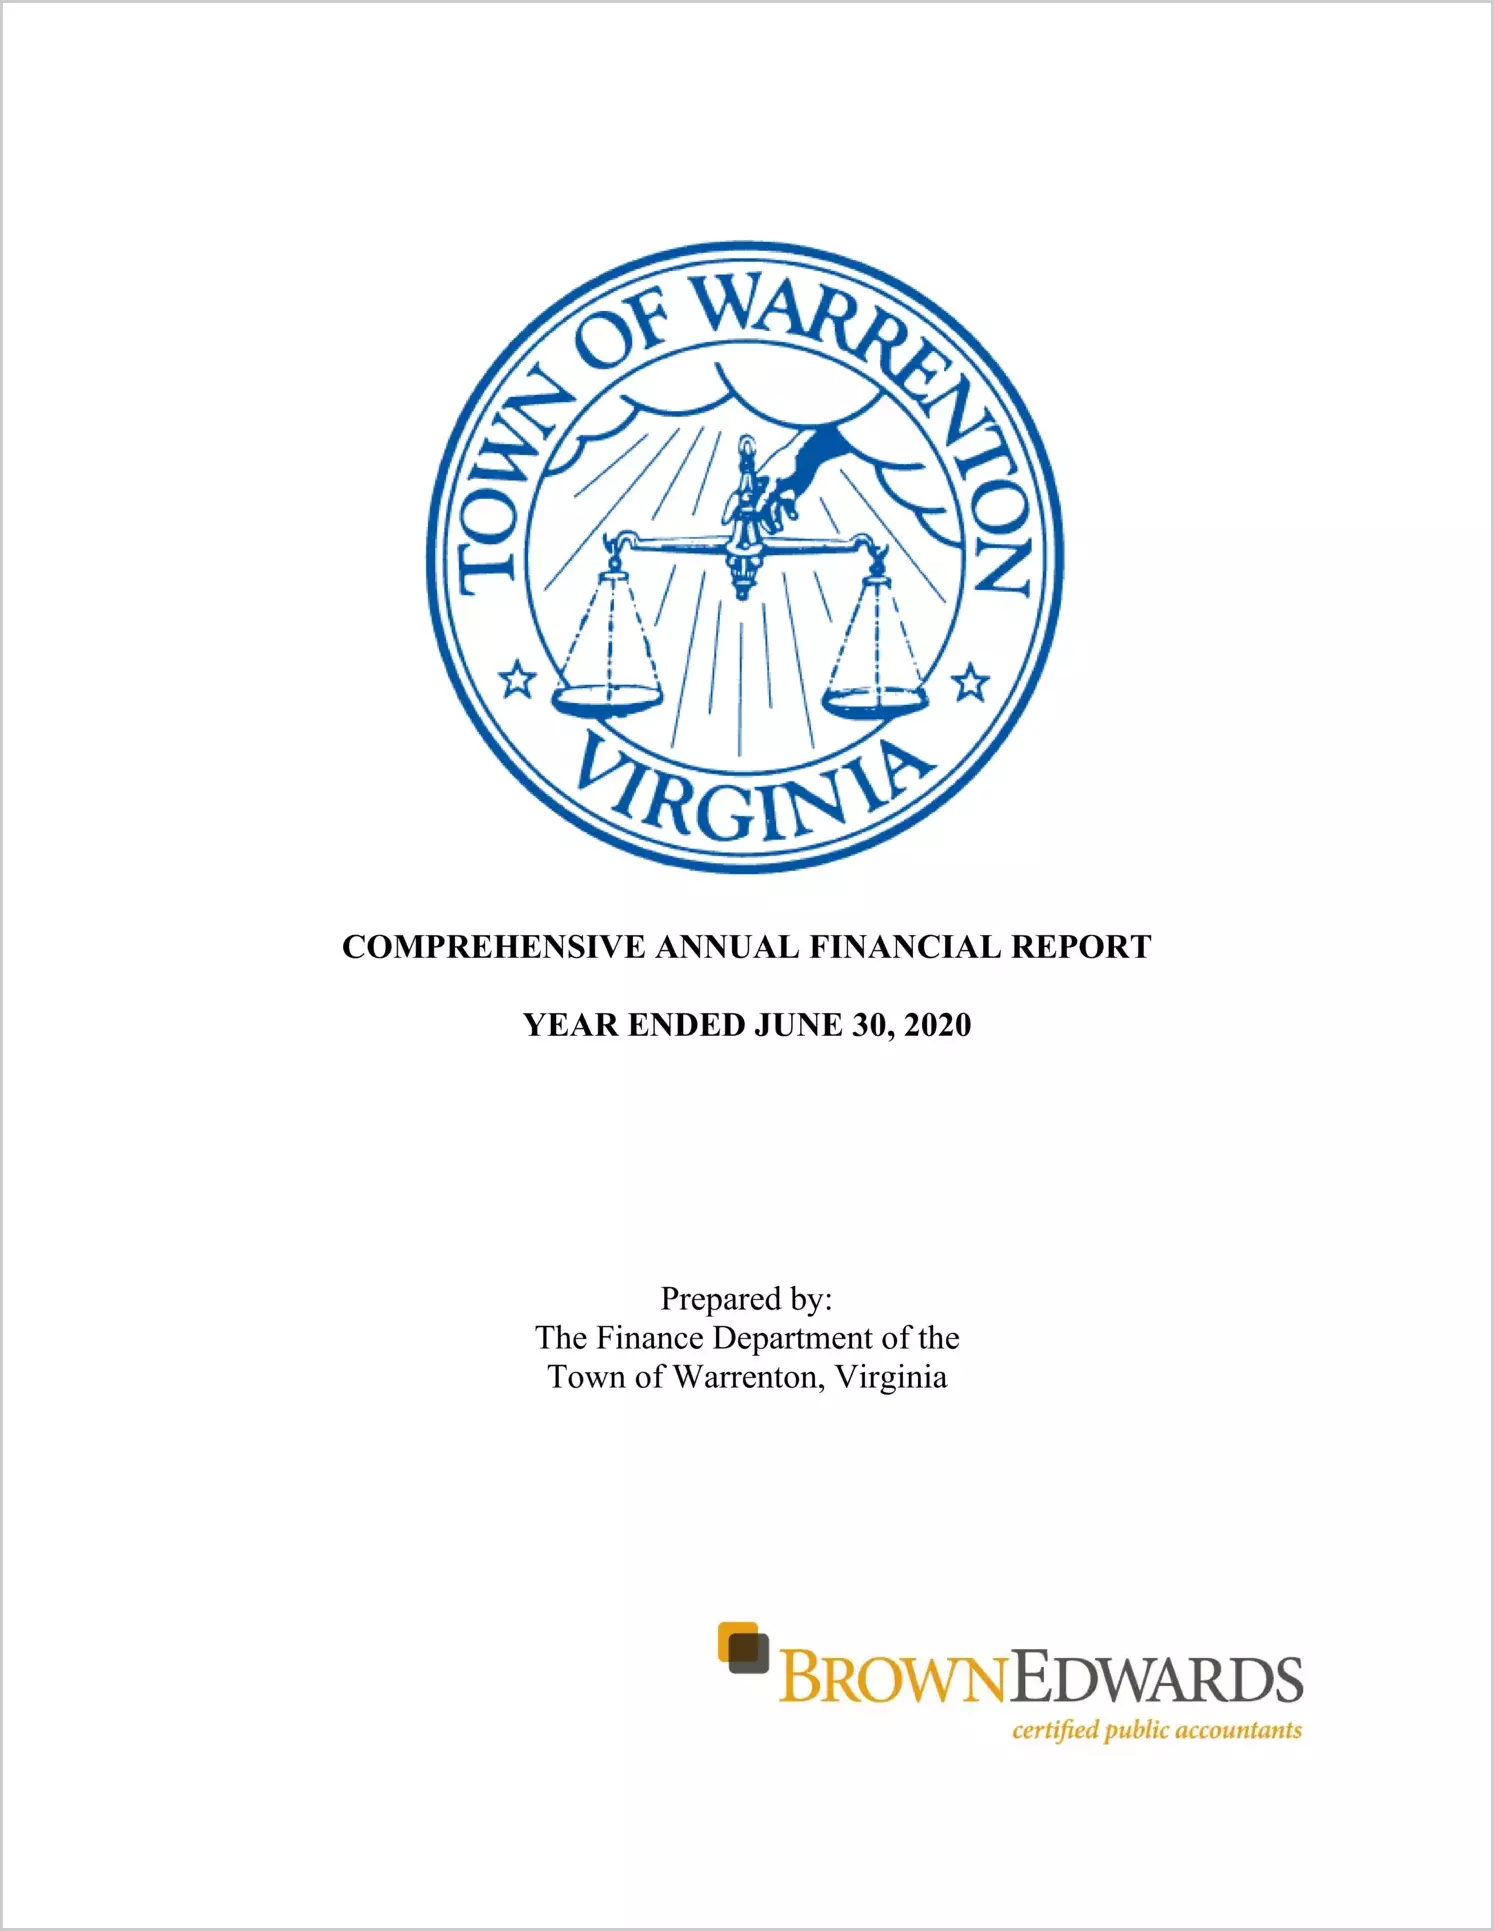 2020 Annual Financial Report for Town of Warrenton